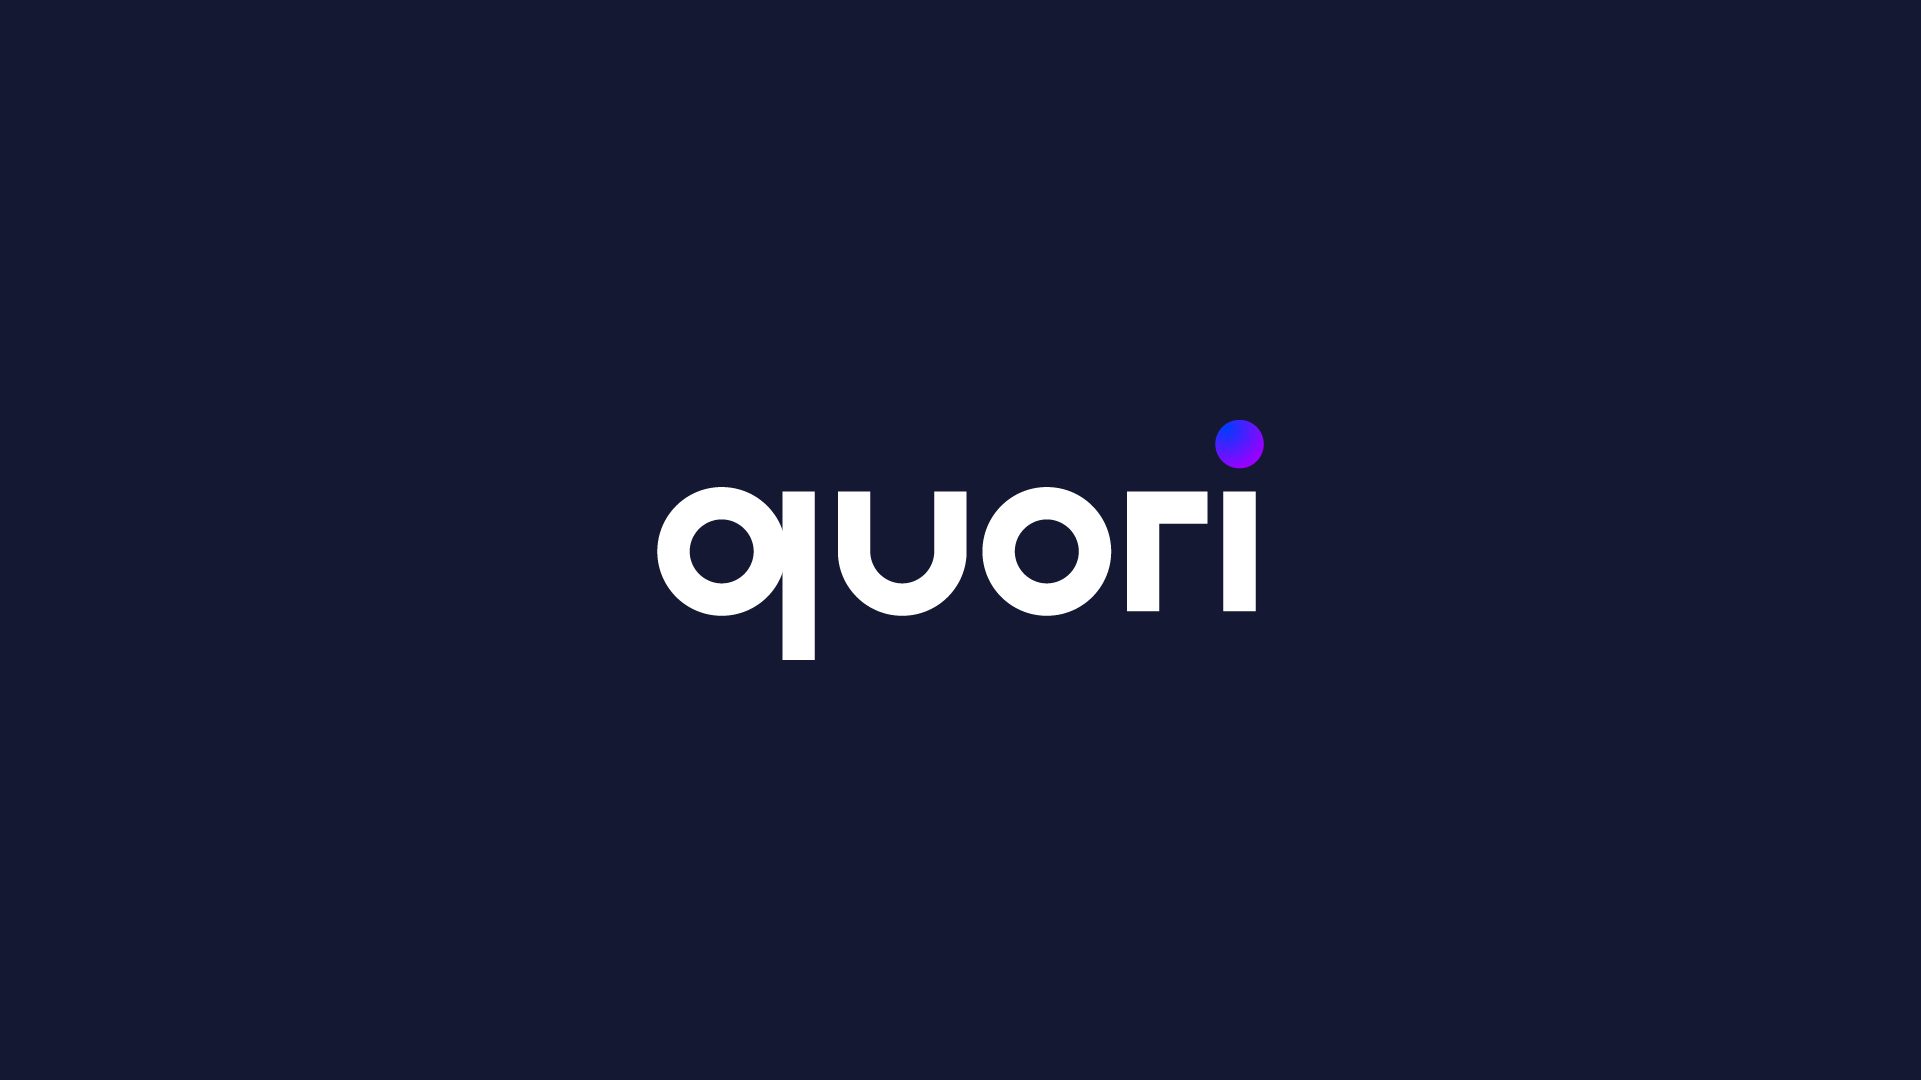 Quori - Risk Management Platform logo, custom lettering design, reflecting uniqueness and tailored risk solutions